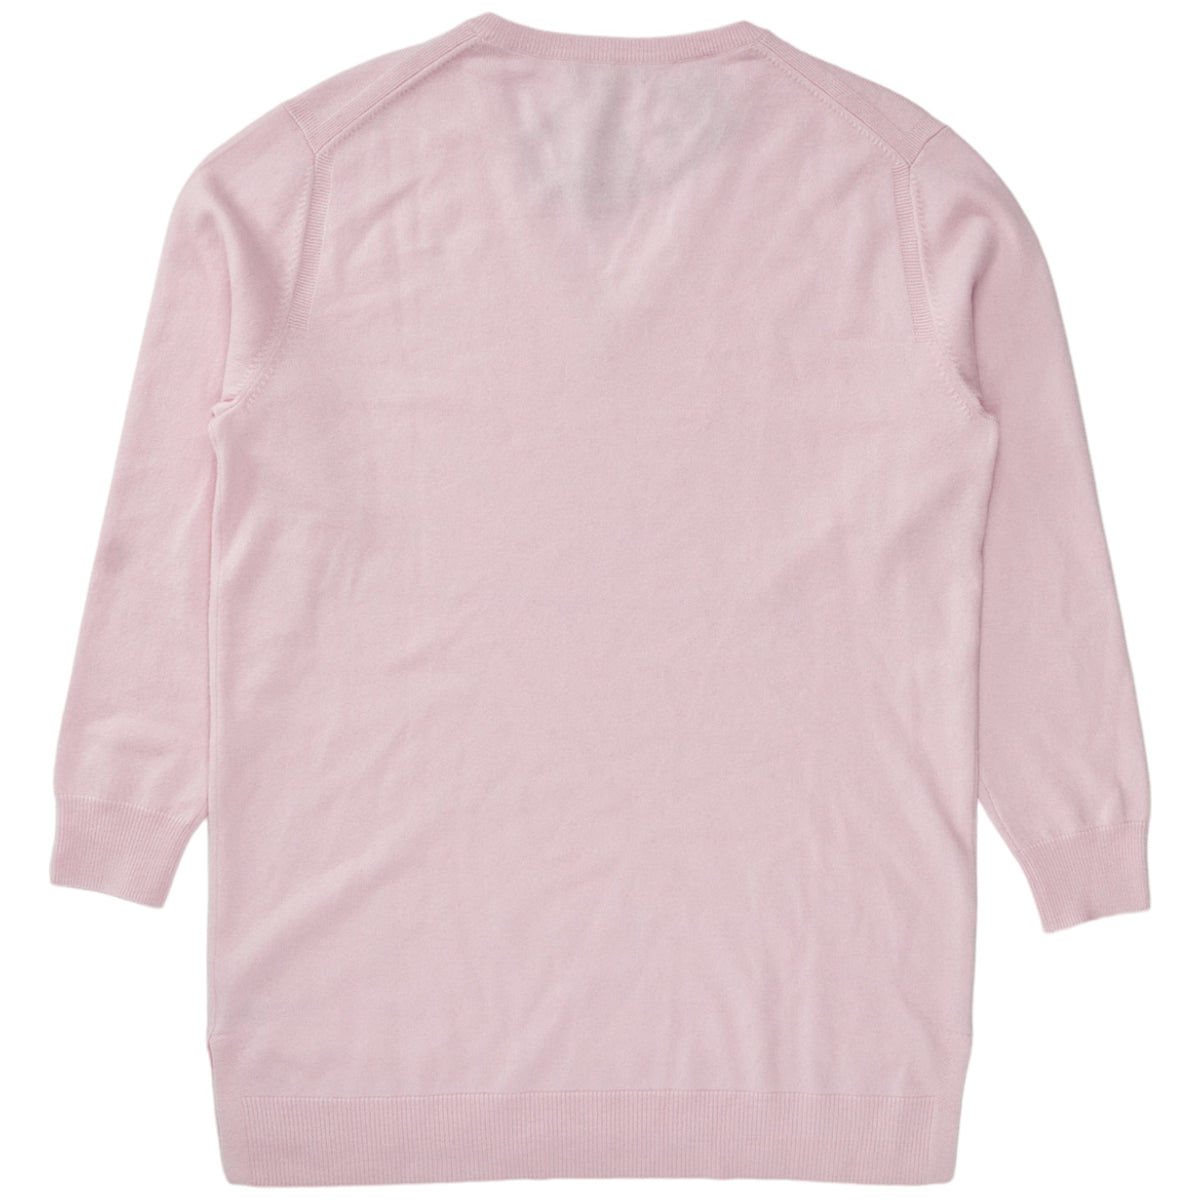 N. Peal Pale Pink Cashmere Sweater